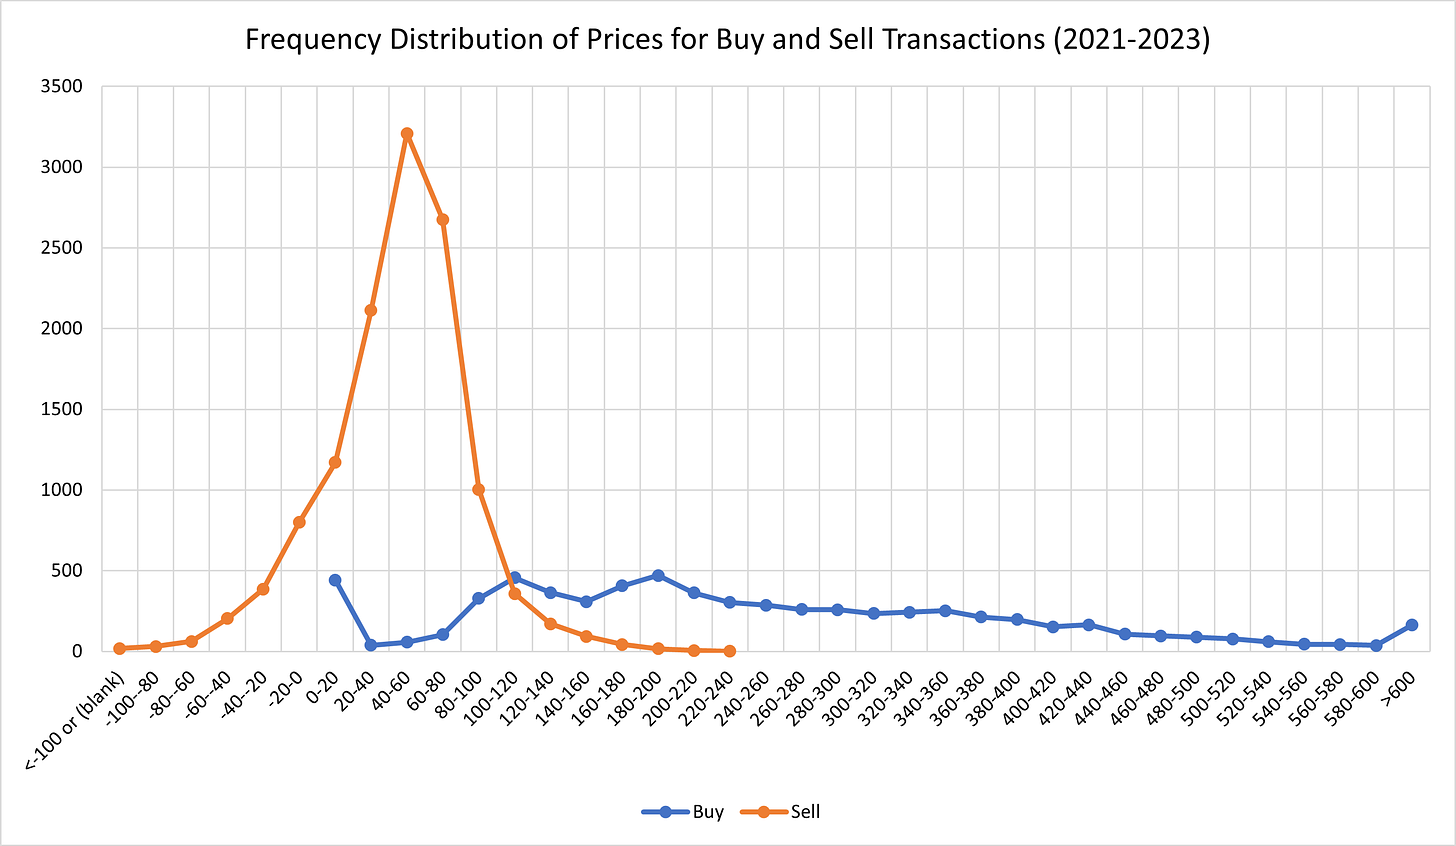 Figure 6a - Frequency Distribution of Prices for Interconnector Buy and Sell Transactions (2021-2023)